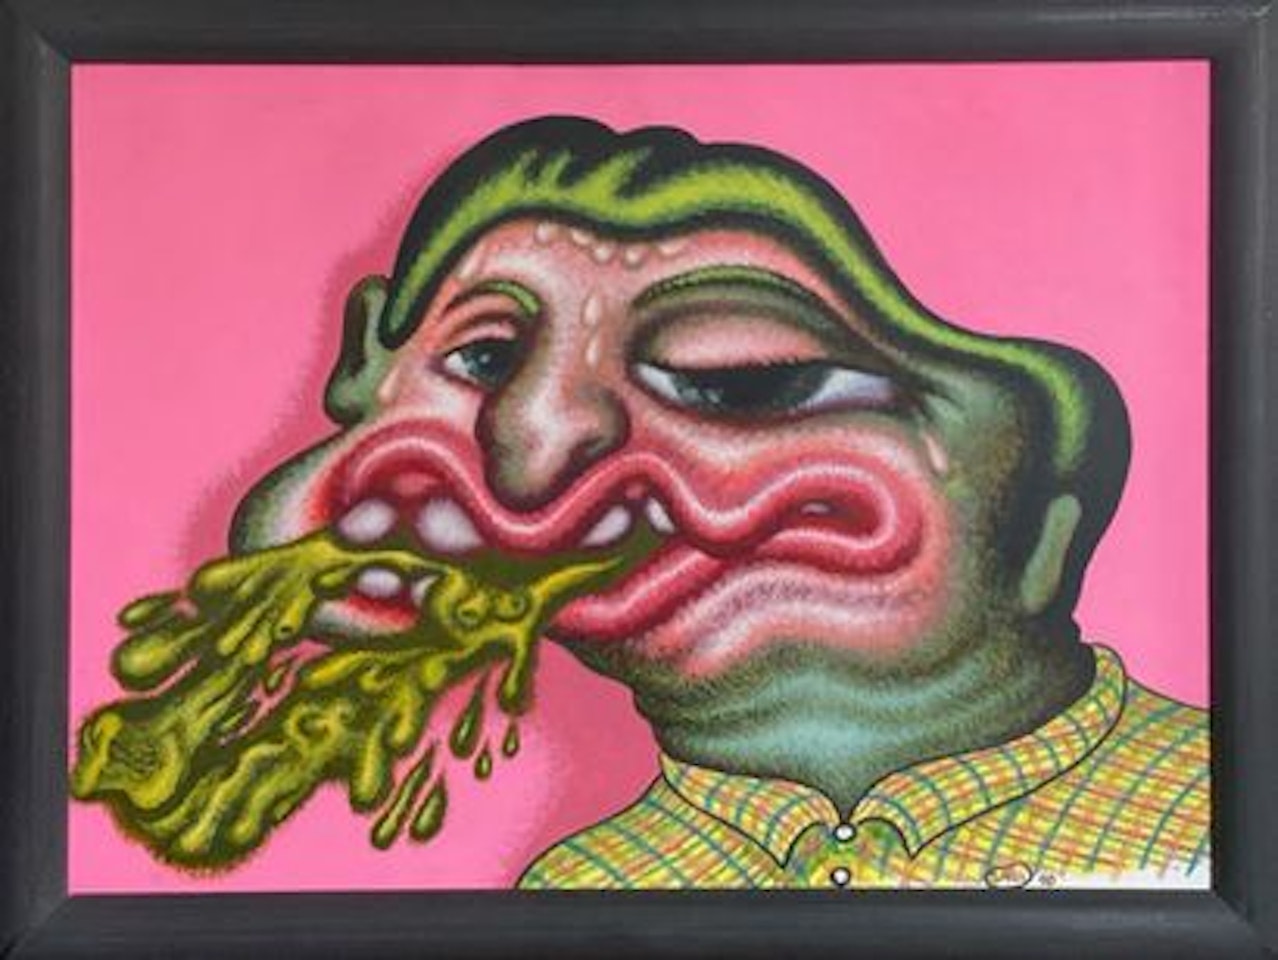 UNTITLED by Peter Saul